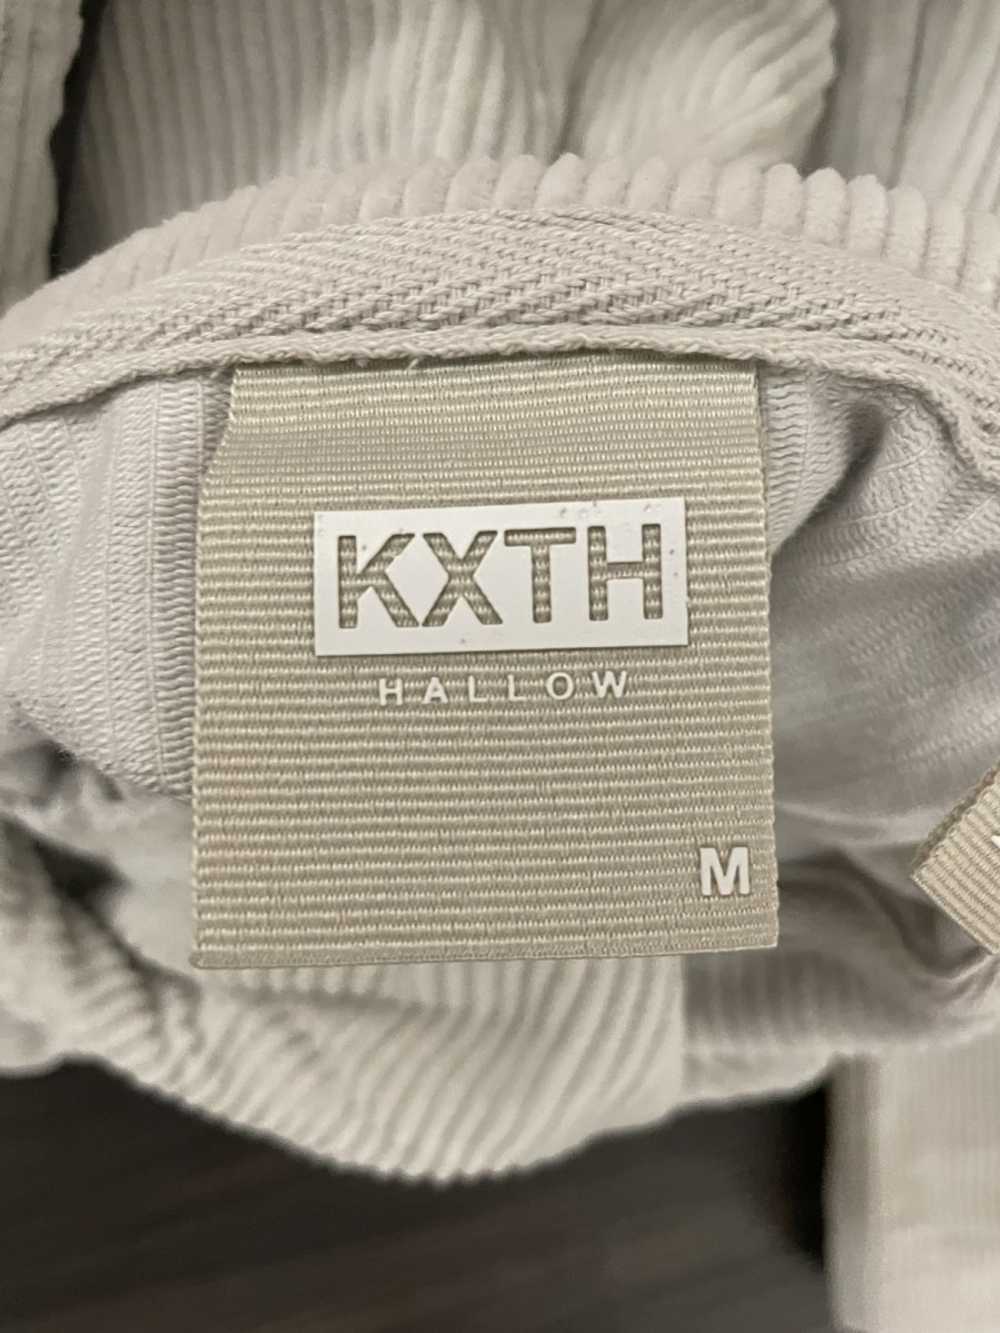 Kith - Corduroy double pocket hoodie with tags - image 10